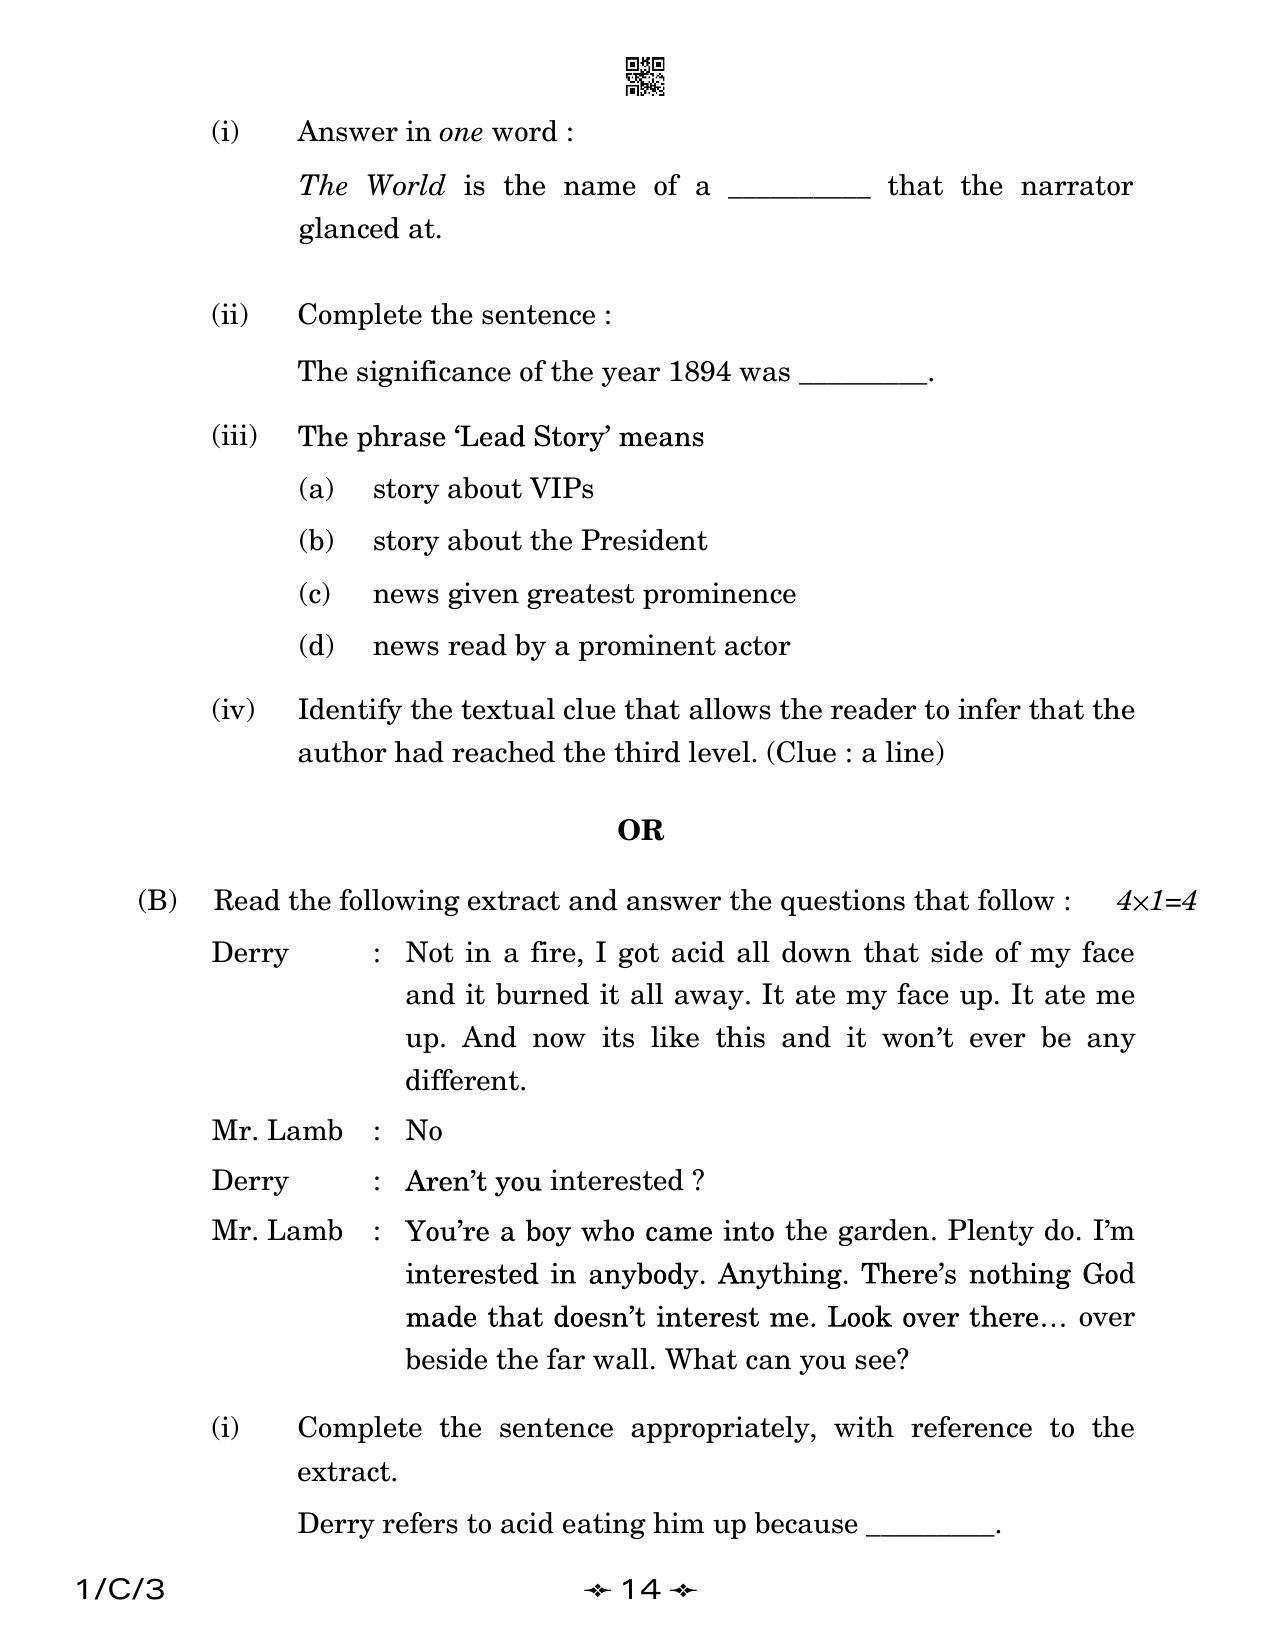 CBSE Class 12 1-3 English Core 2023 (Compartment) Question Paper - Page 14